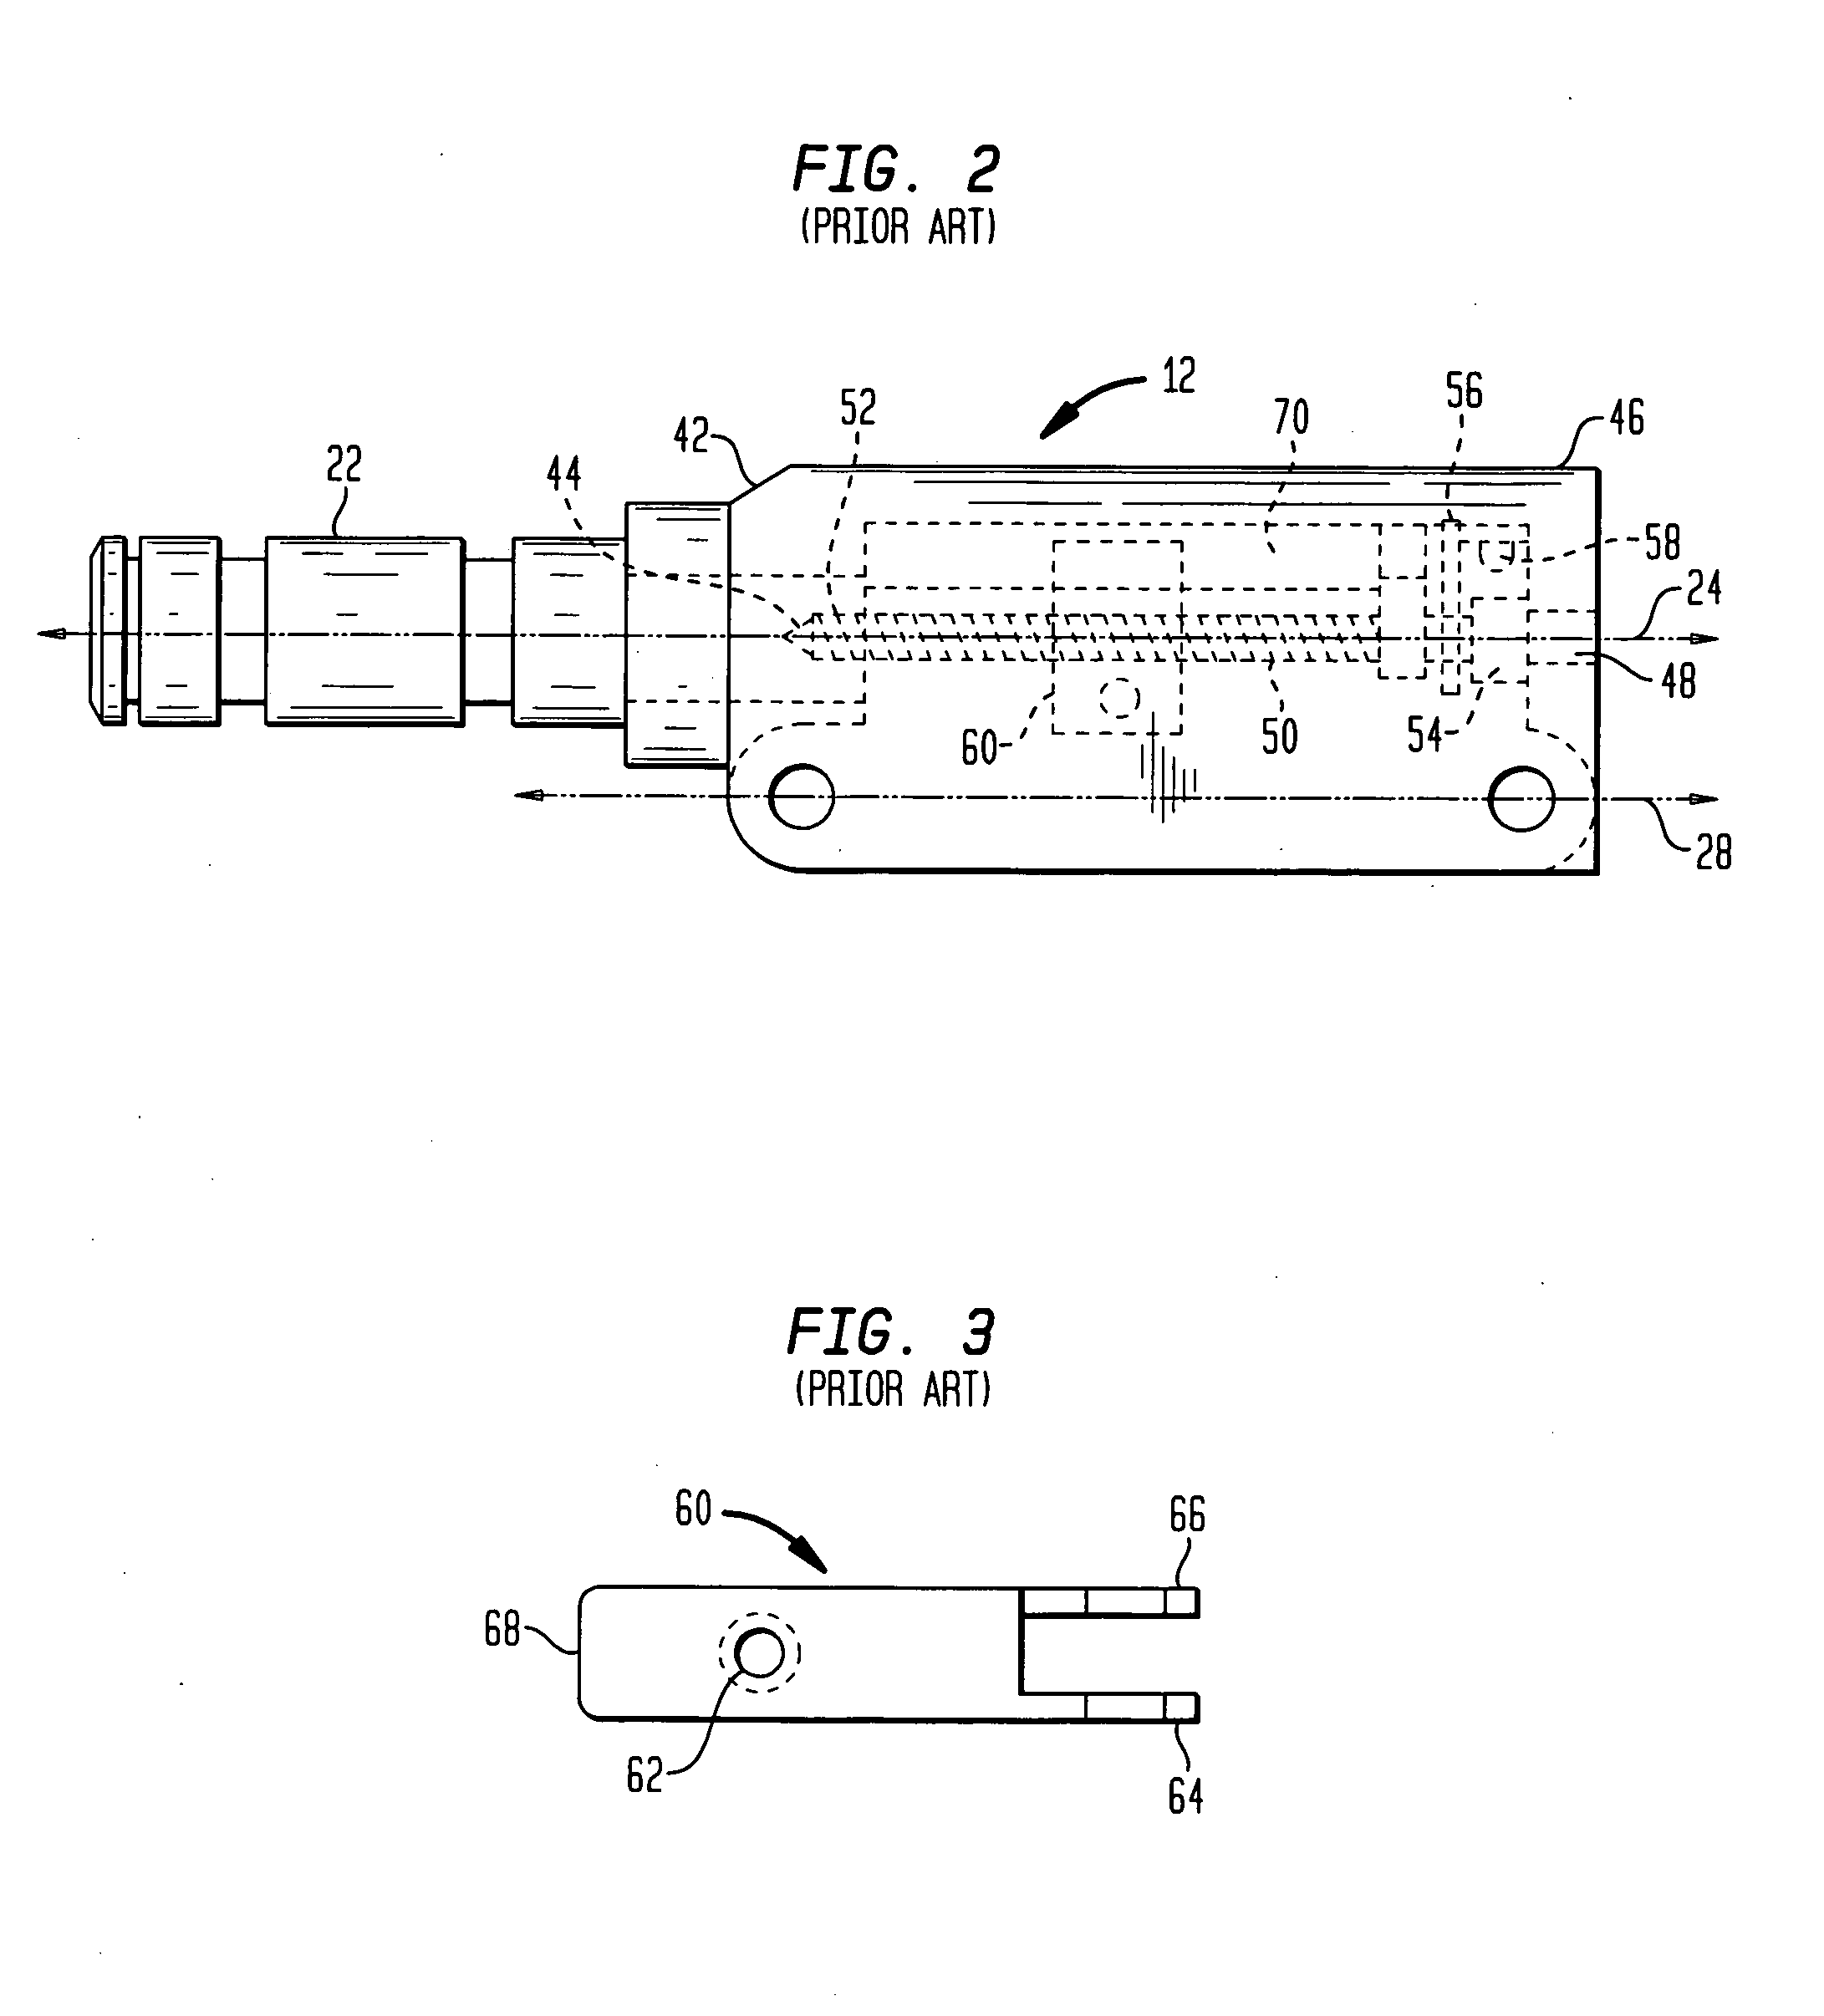 Angled mini arm having a clevis assembly